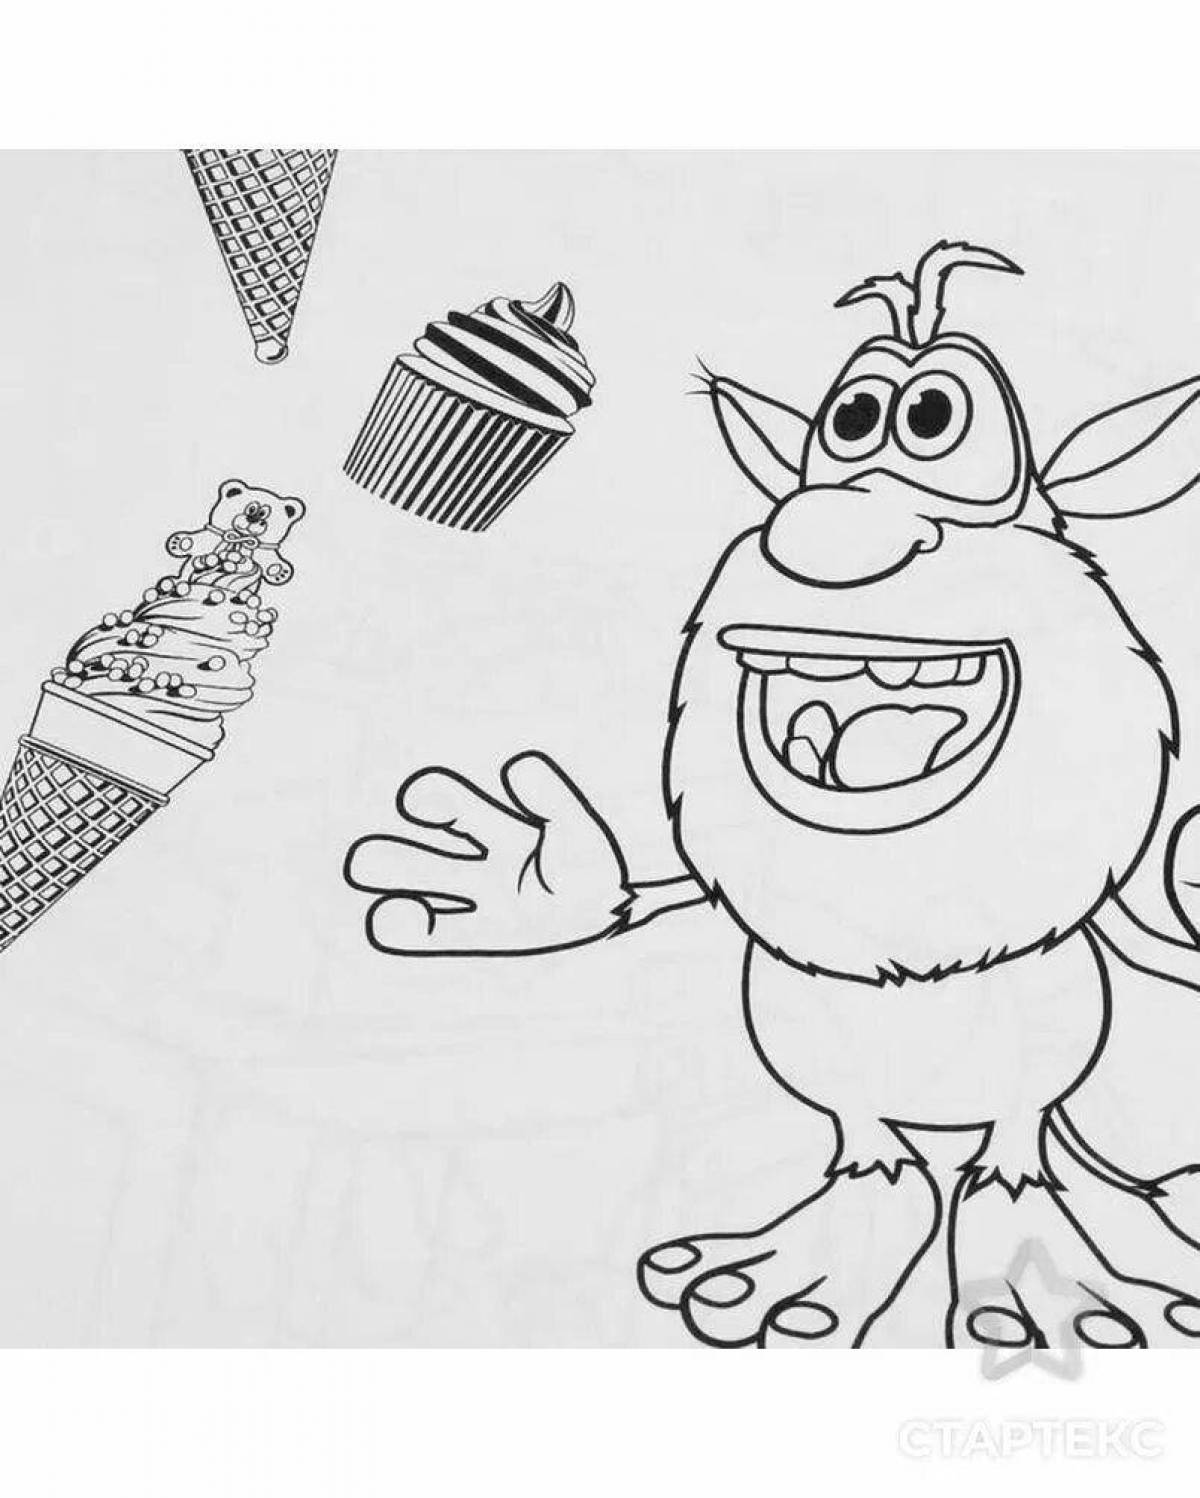 Charming buba coloring book for kids